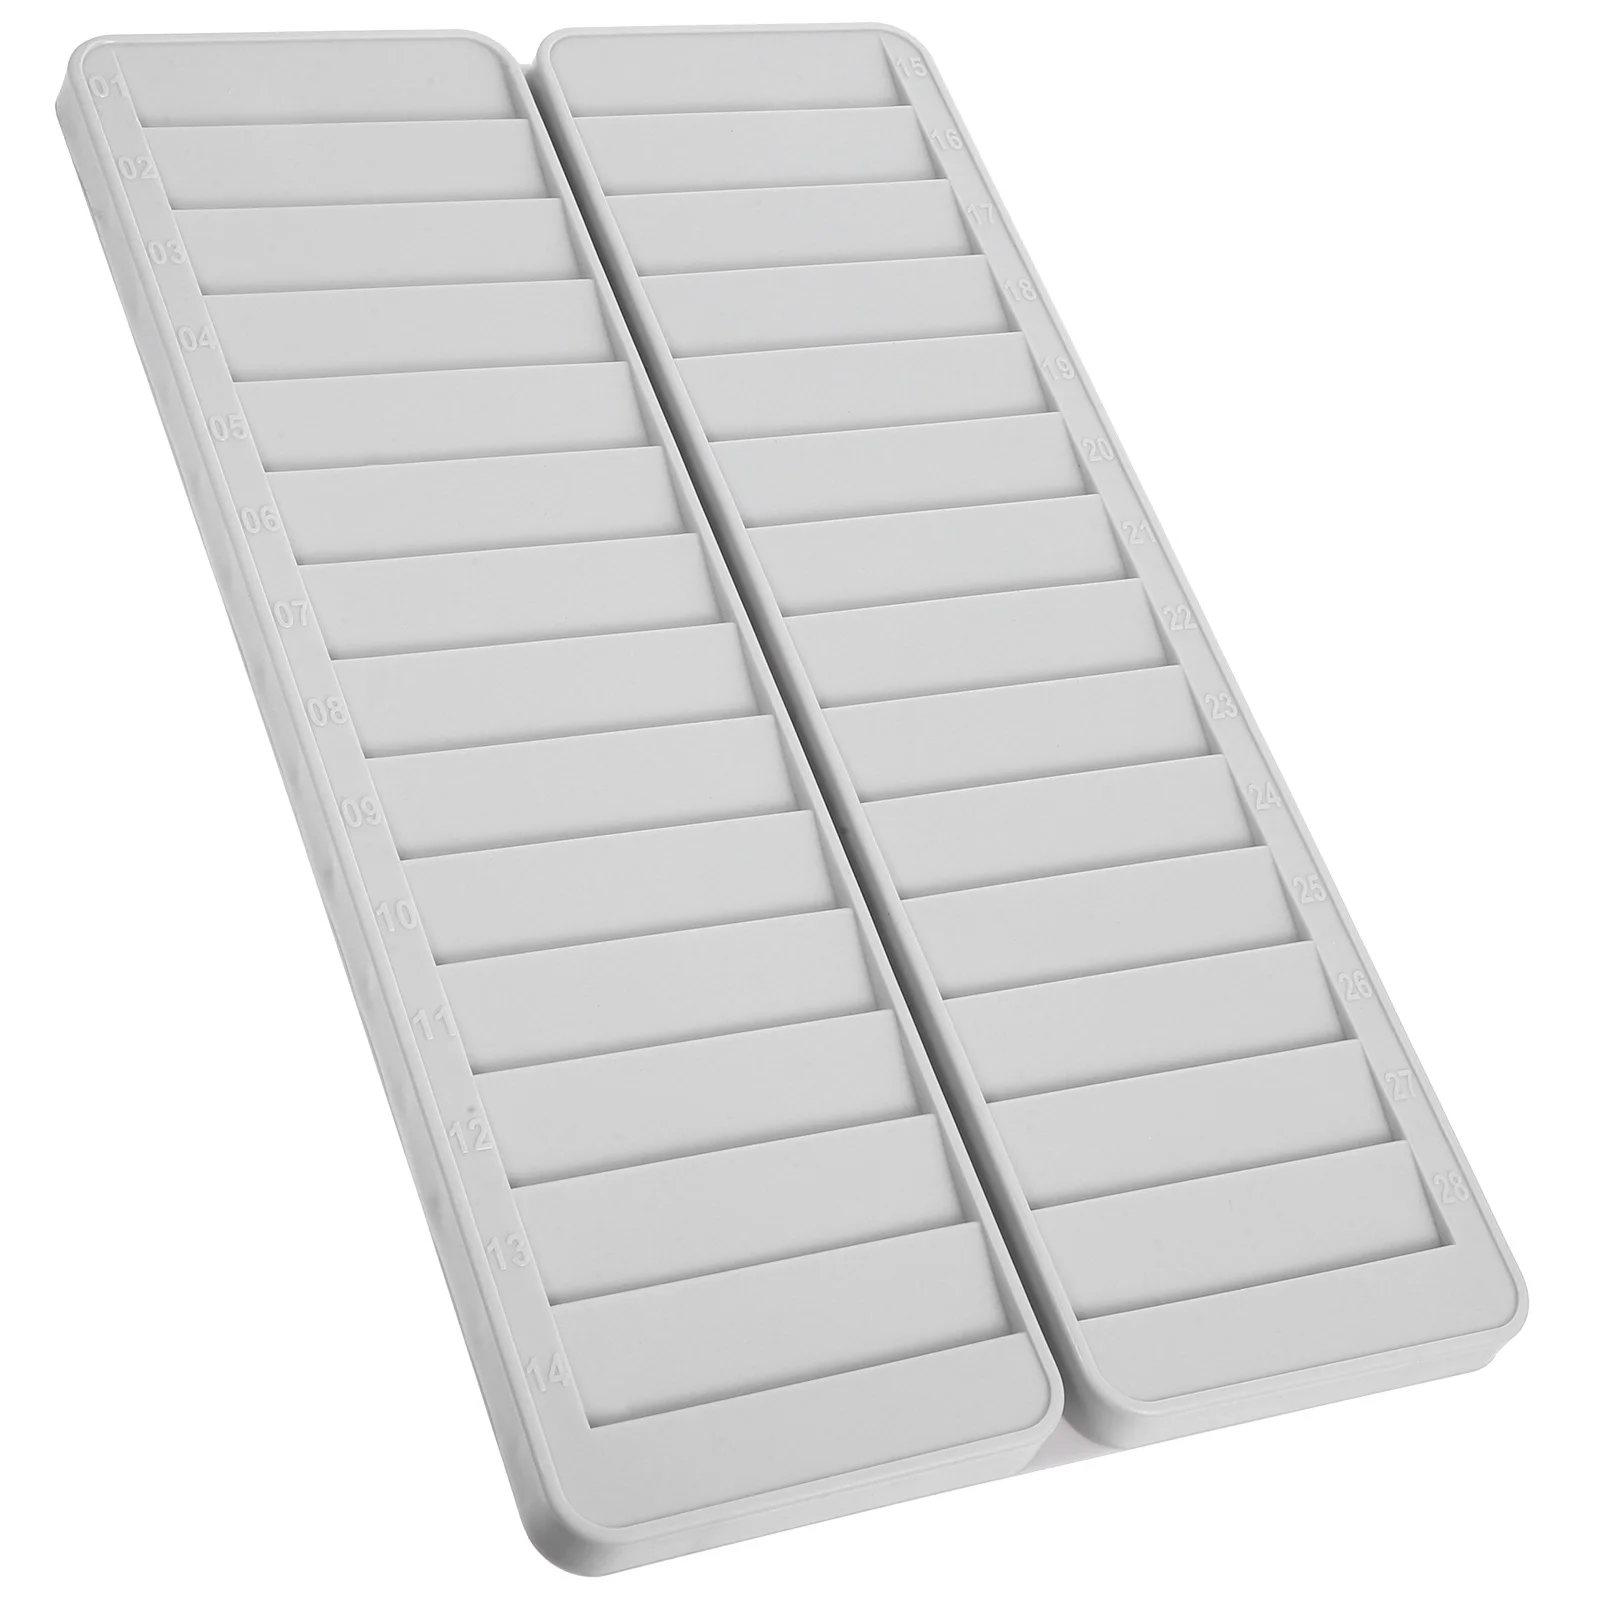 

Plastic Business Card Holder Clock Slots Cards Vertical 28-slots Rack Attendance Storage Pp Office Time Wall Mounted